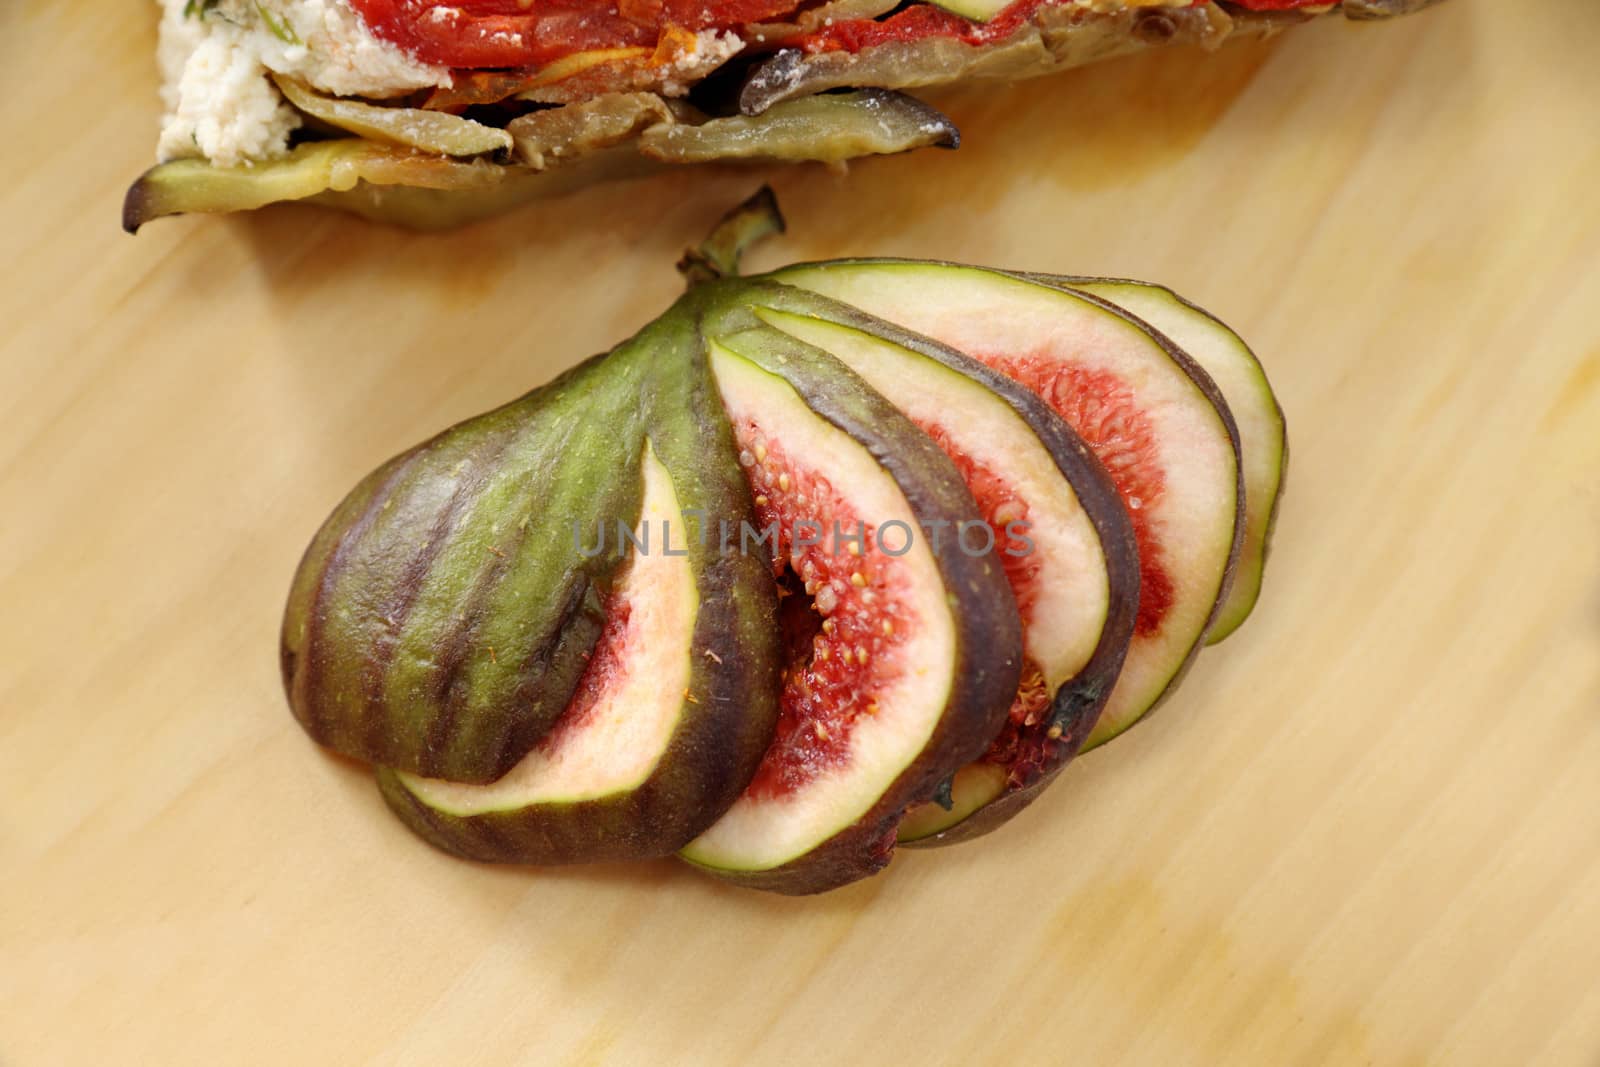 Delicious rustic organic sliced fig straight from the orchard.